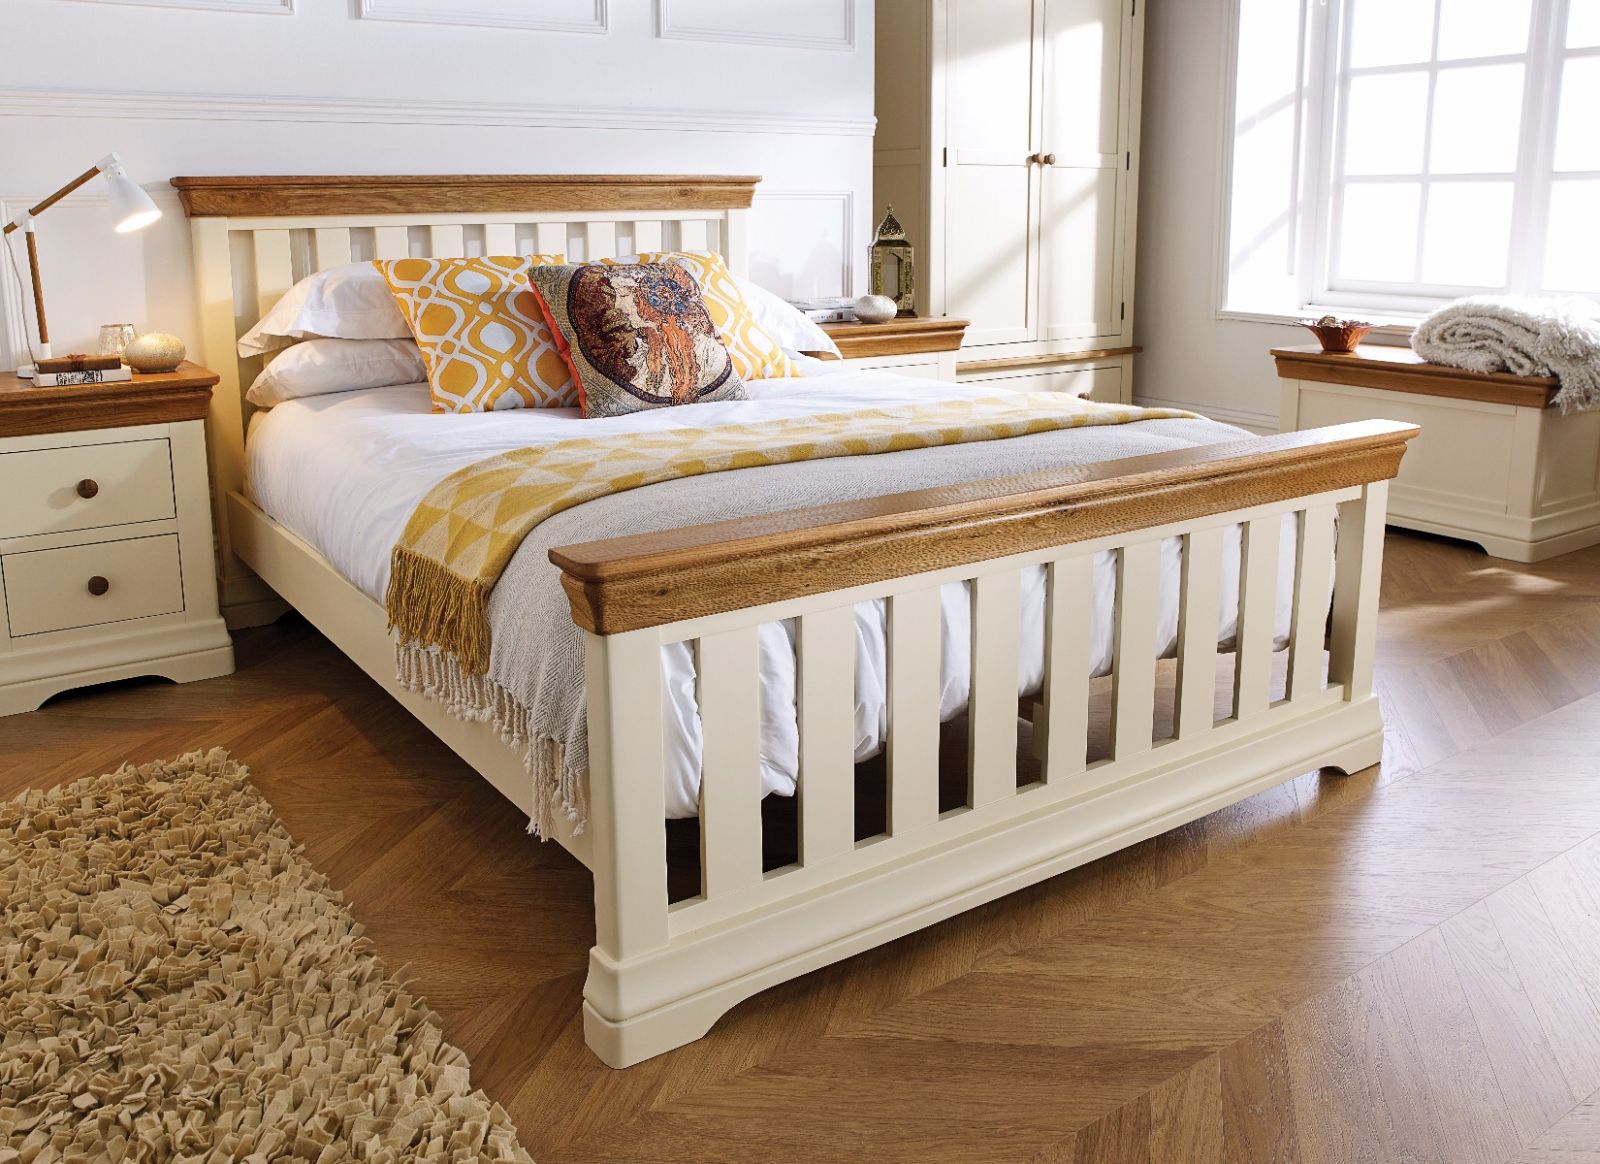 Farmhouse Country Oak Cream Painted Slatted 5 Foot King Size Bed - WINTER SALE